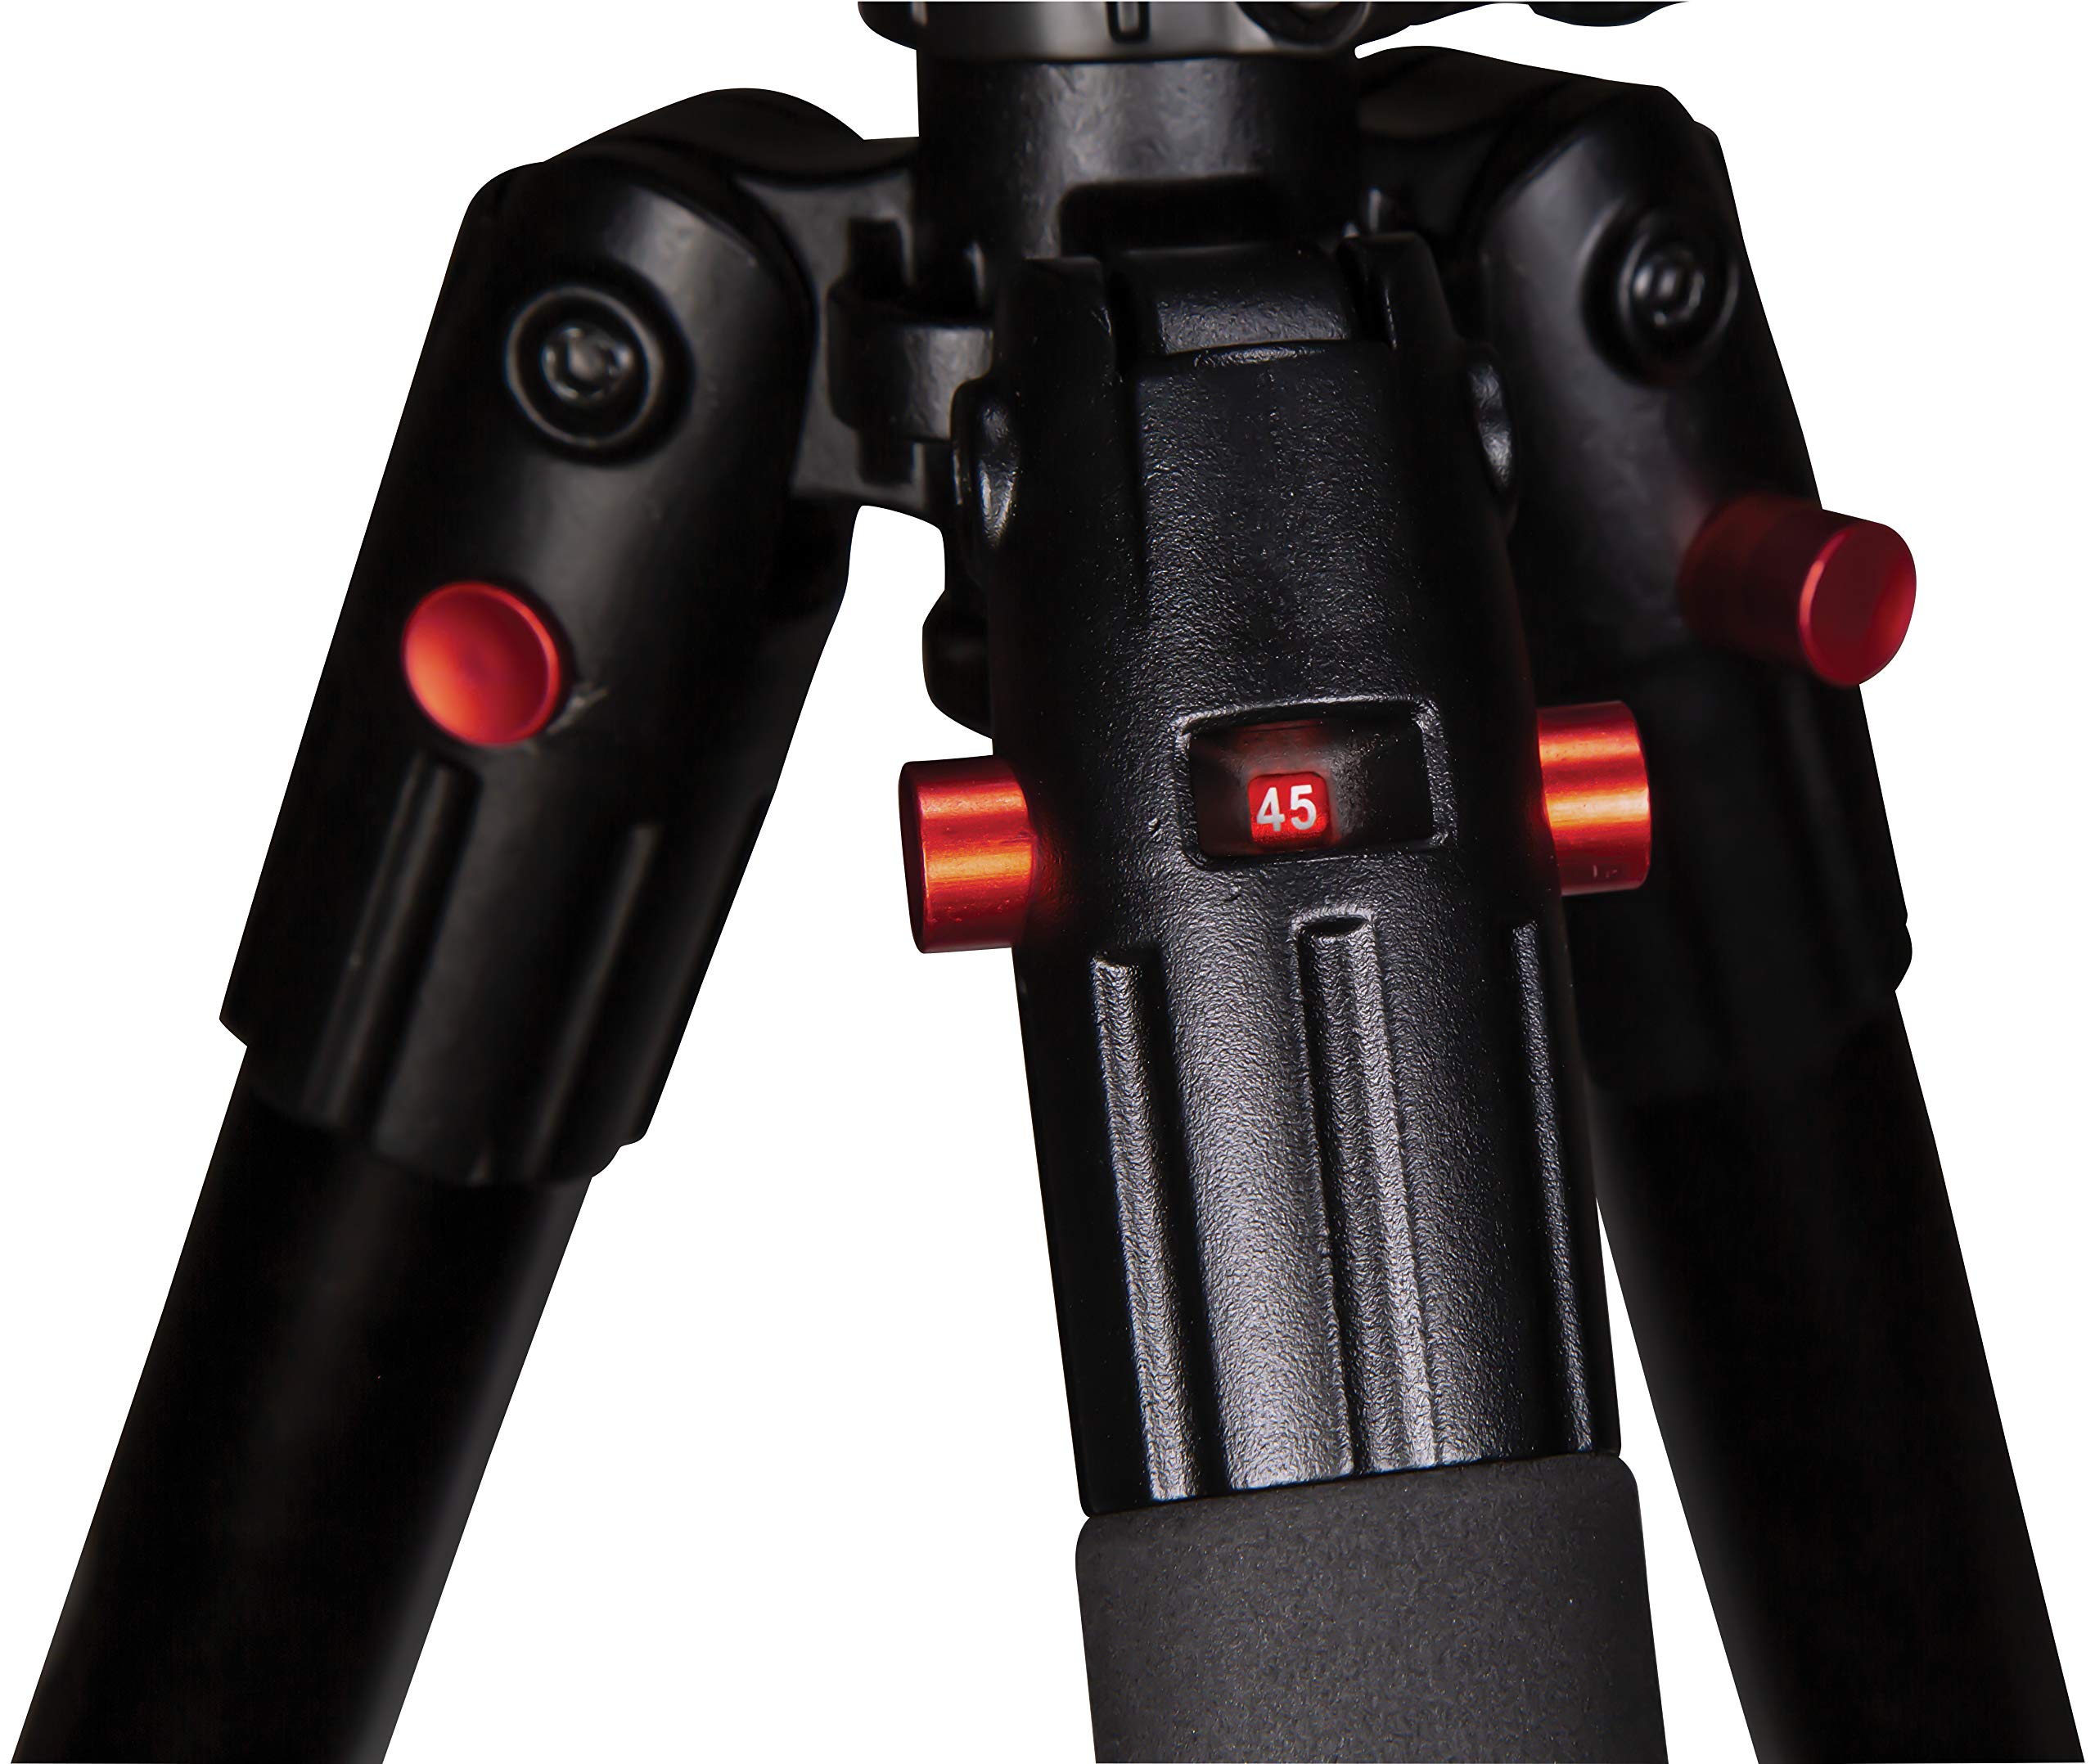 BOG DeathGrip Tripods with Durable Aluminum and Carbon Fiber Frames, Lightweight, Stable Design, Bubble Level, Adjustable Legs, and Hands-Free Operation for Hunting, Shooting, and Outdoors